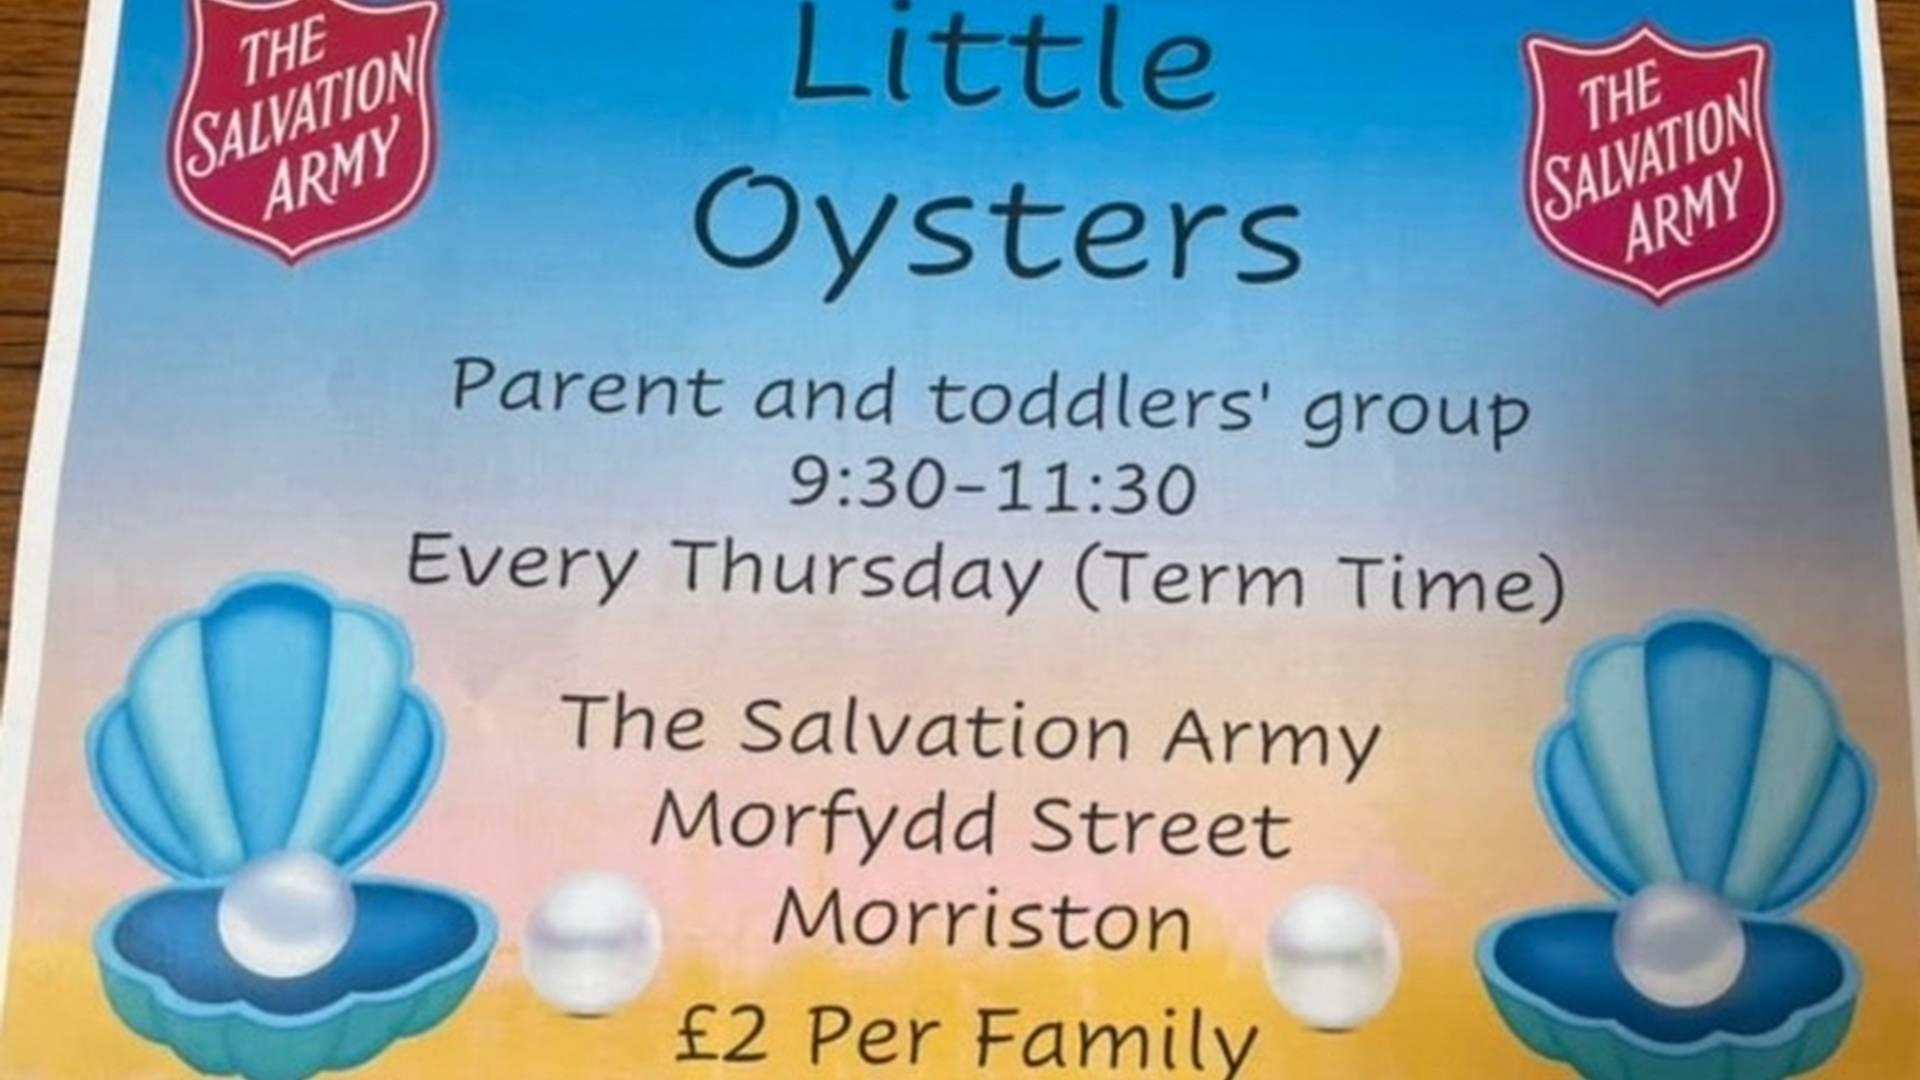 Little Oysters parent and toddler group photo